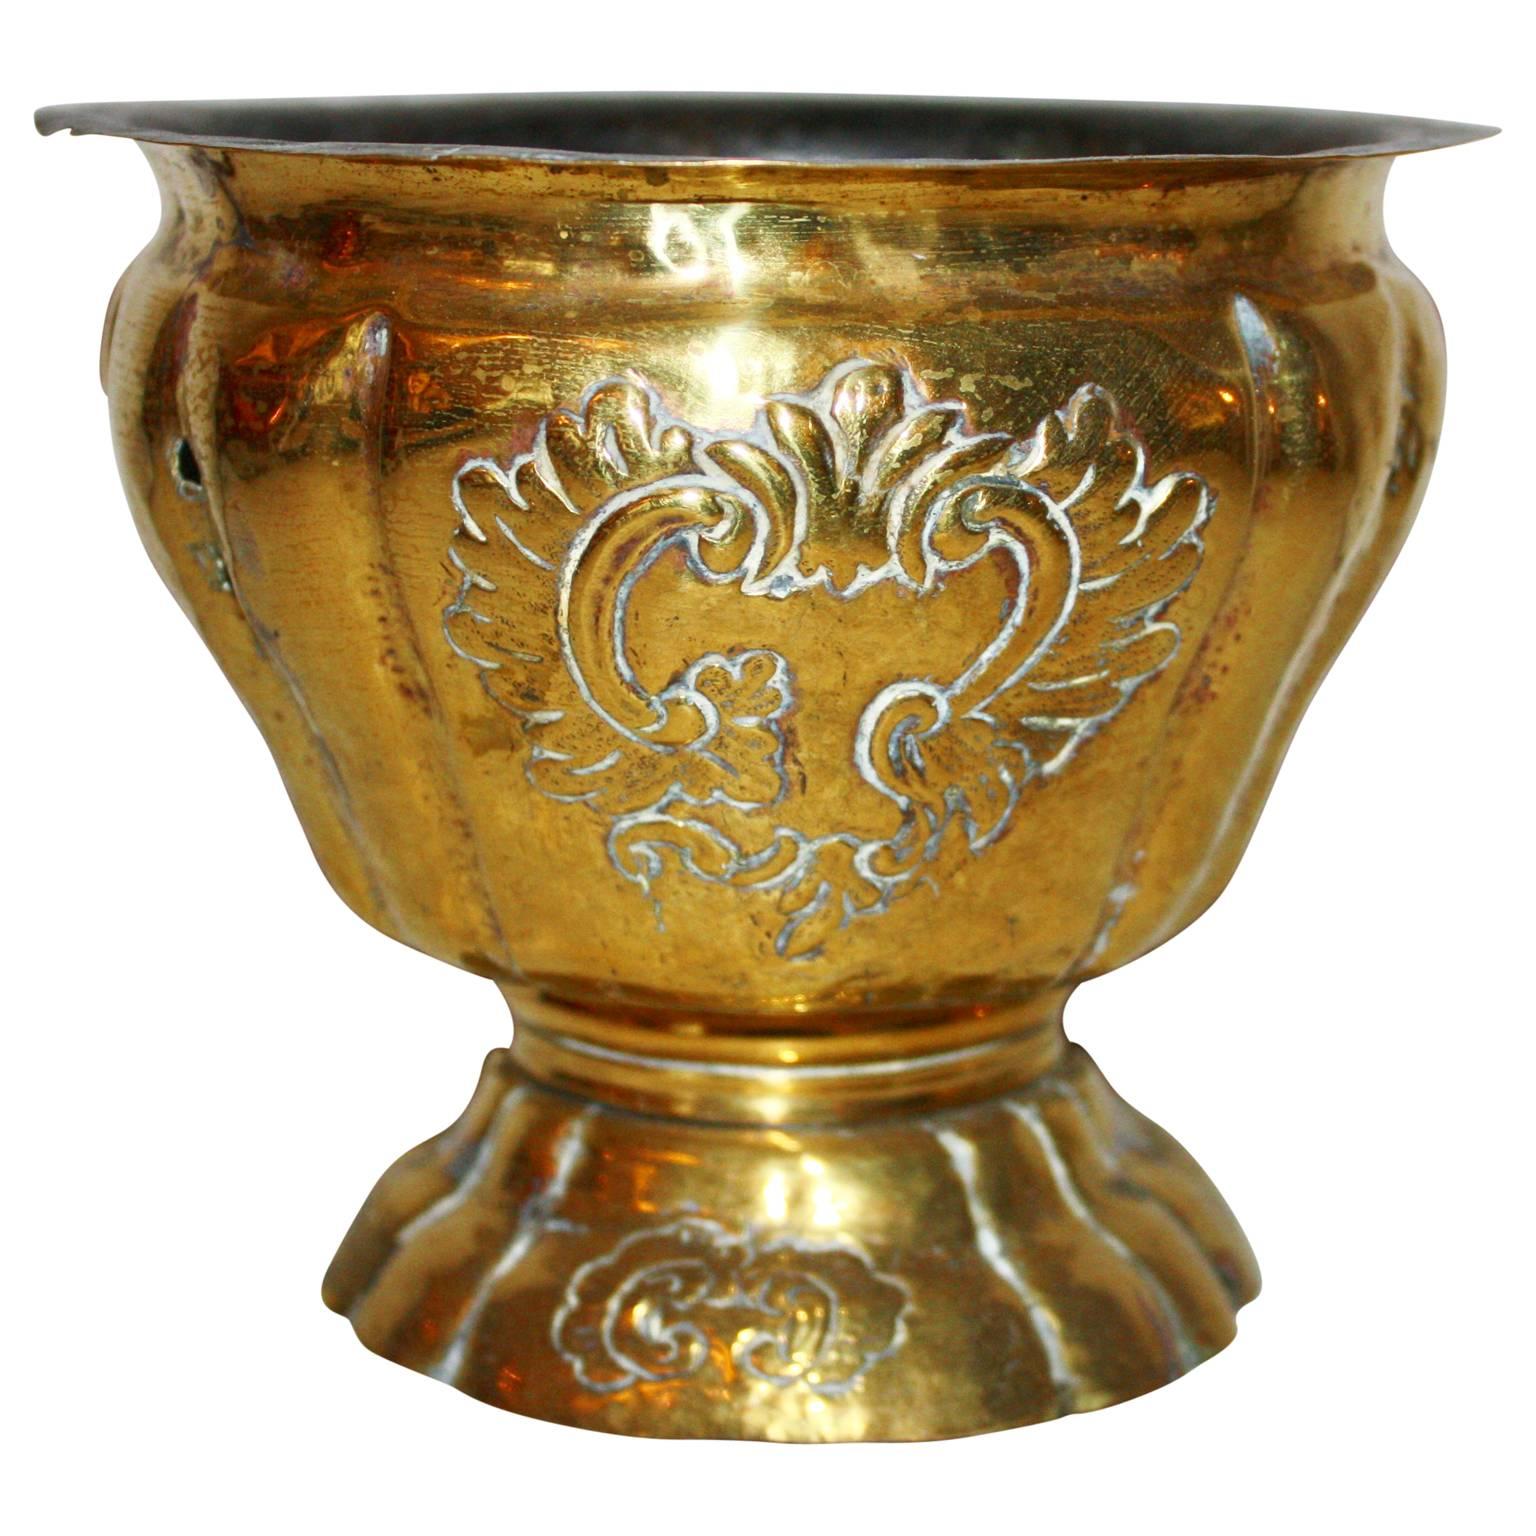 French Rococo Planter or Flower Pot in Brass, Circa 1780

Period French flower pot with beautiful large Rococo decorations.